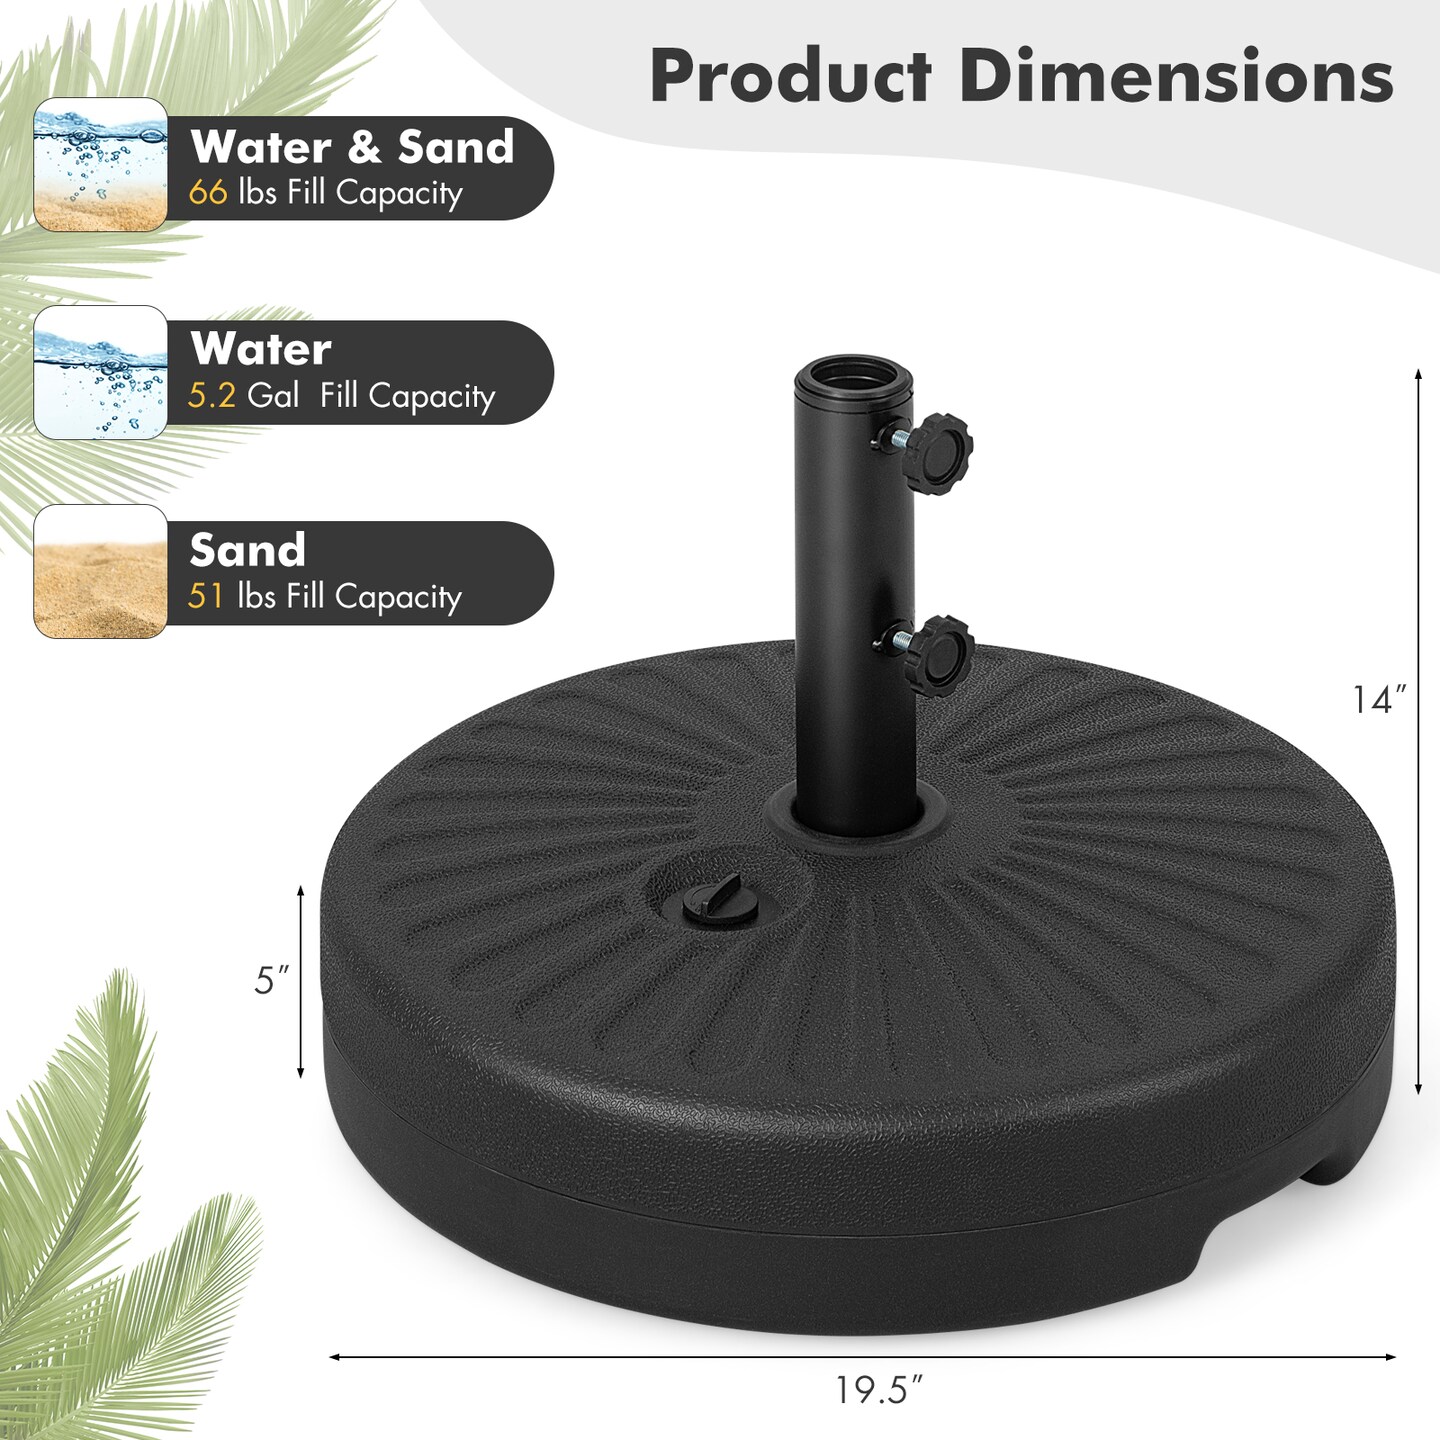 19.5 Inch Fillable Round Umbrella Base Stand for Yard Garden Poolside-Black